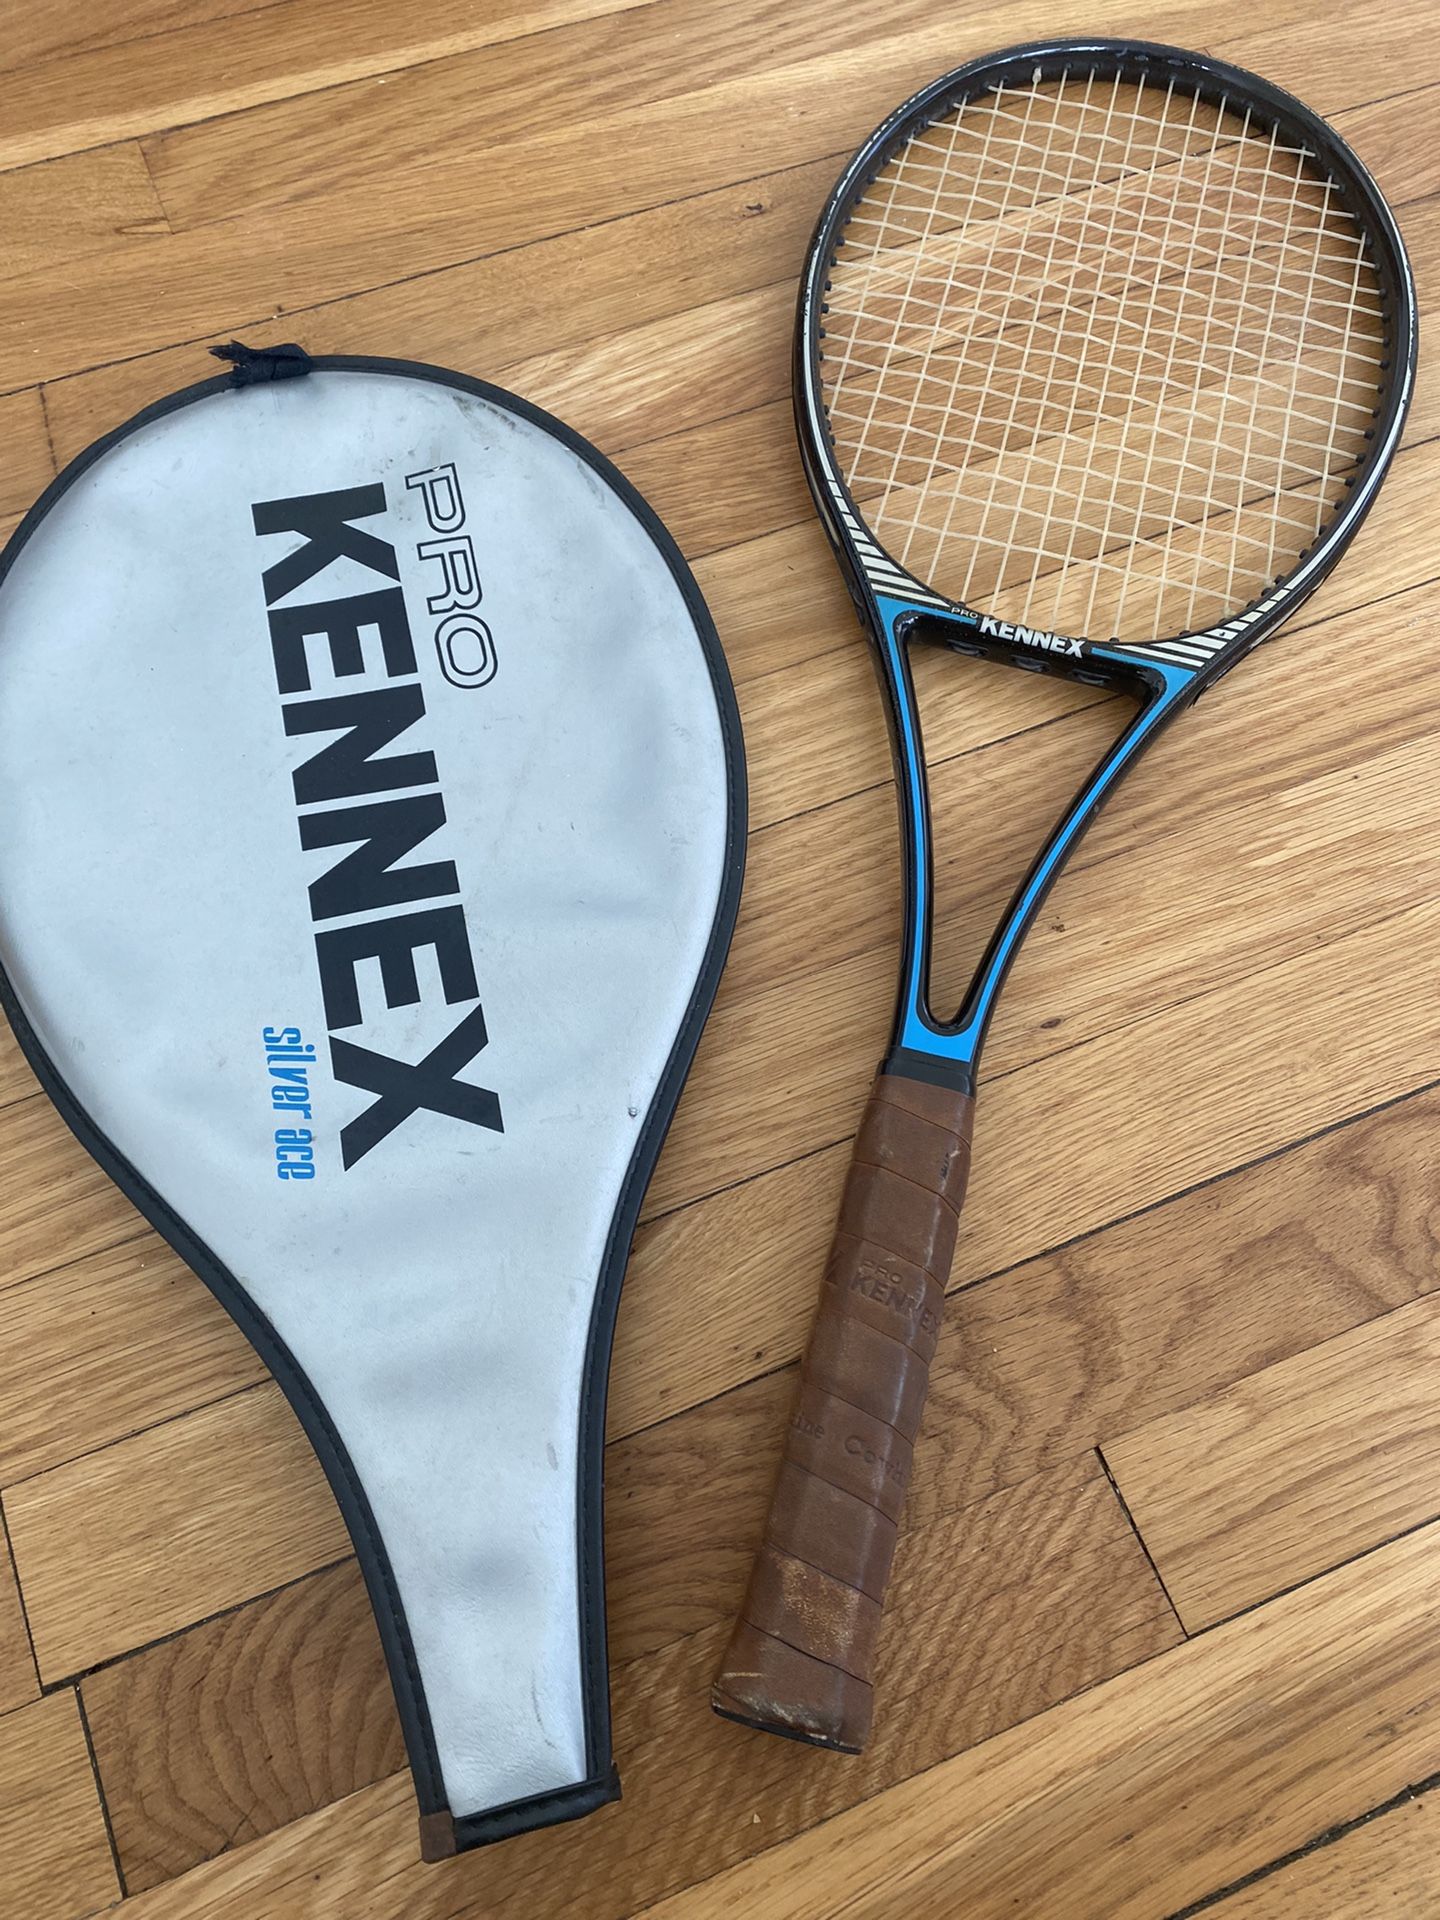 pro kennel mid size graphite silver ace tennis racket and jacket /11” width 27” length 